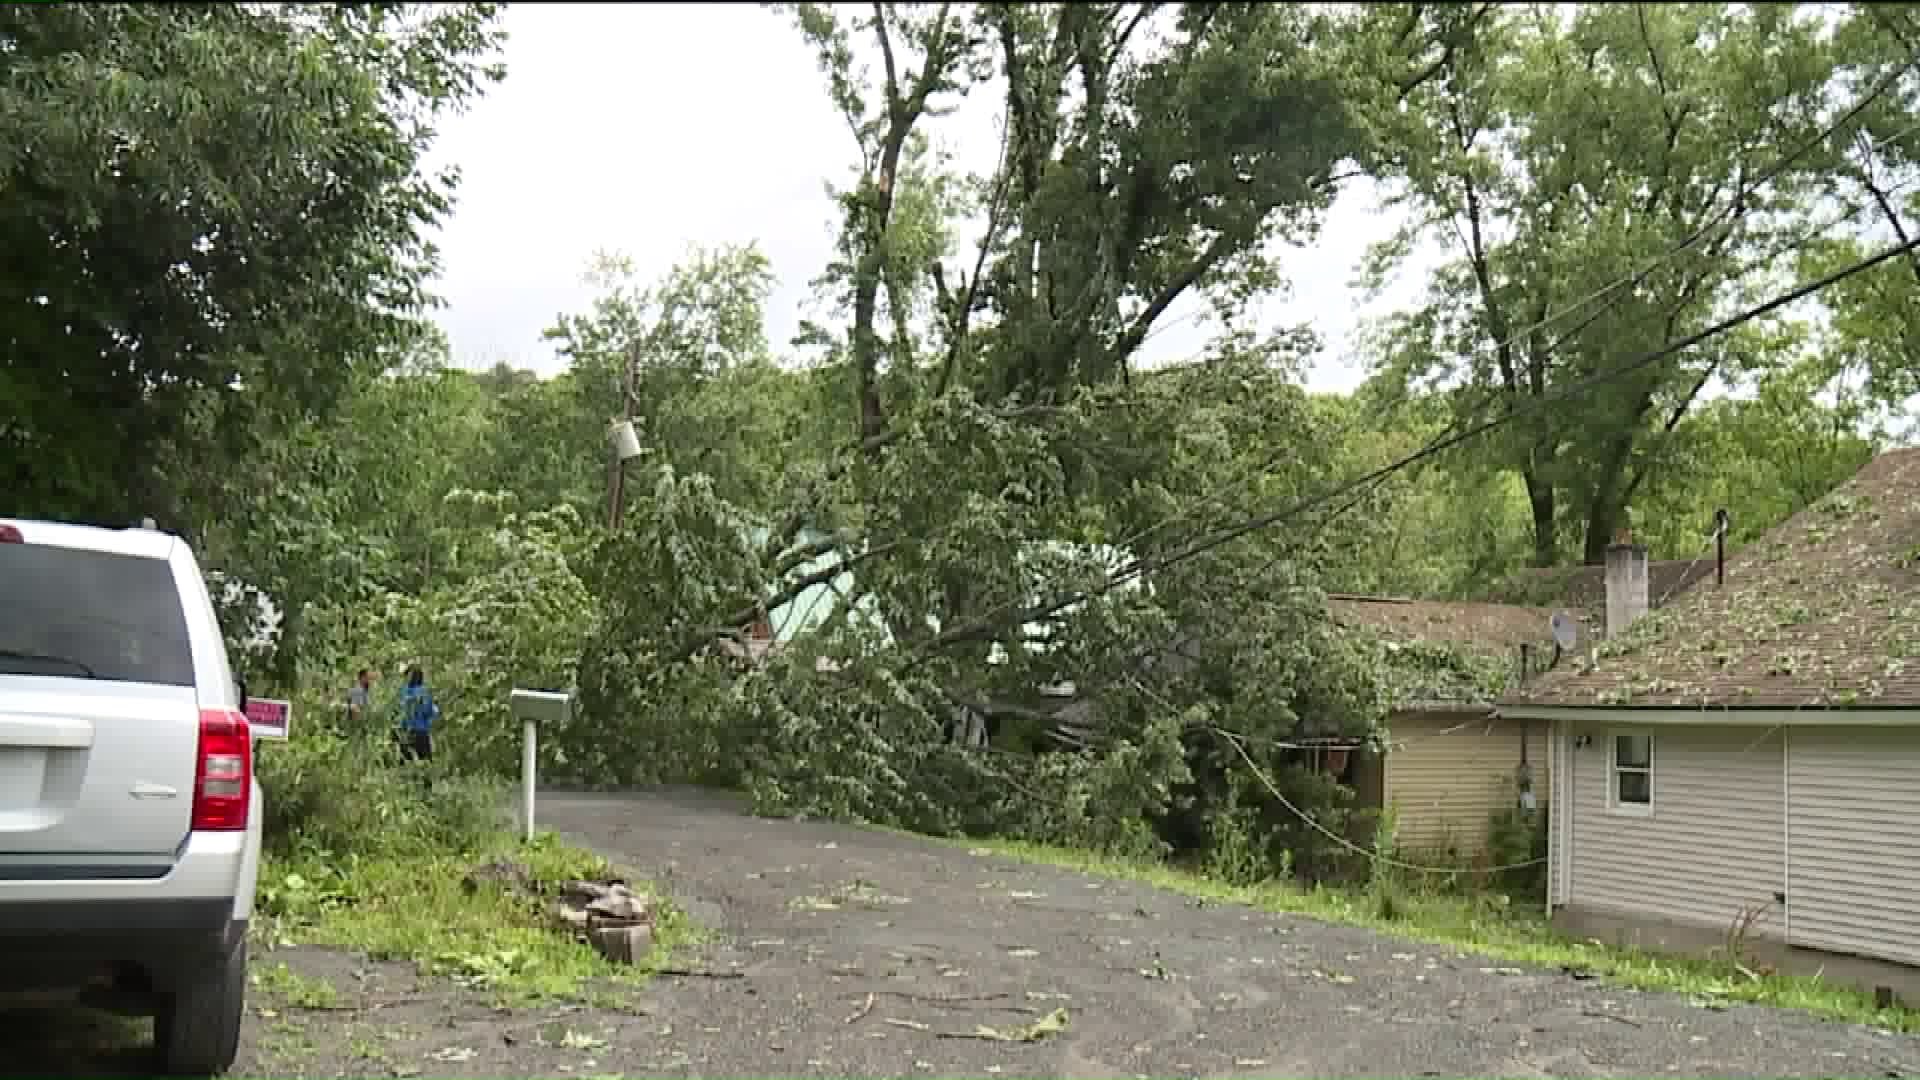 Cleanup Begins in Wyoming County After Severe Storms